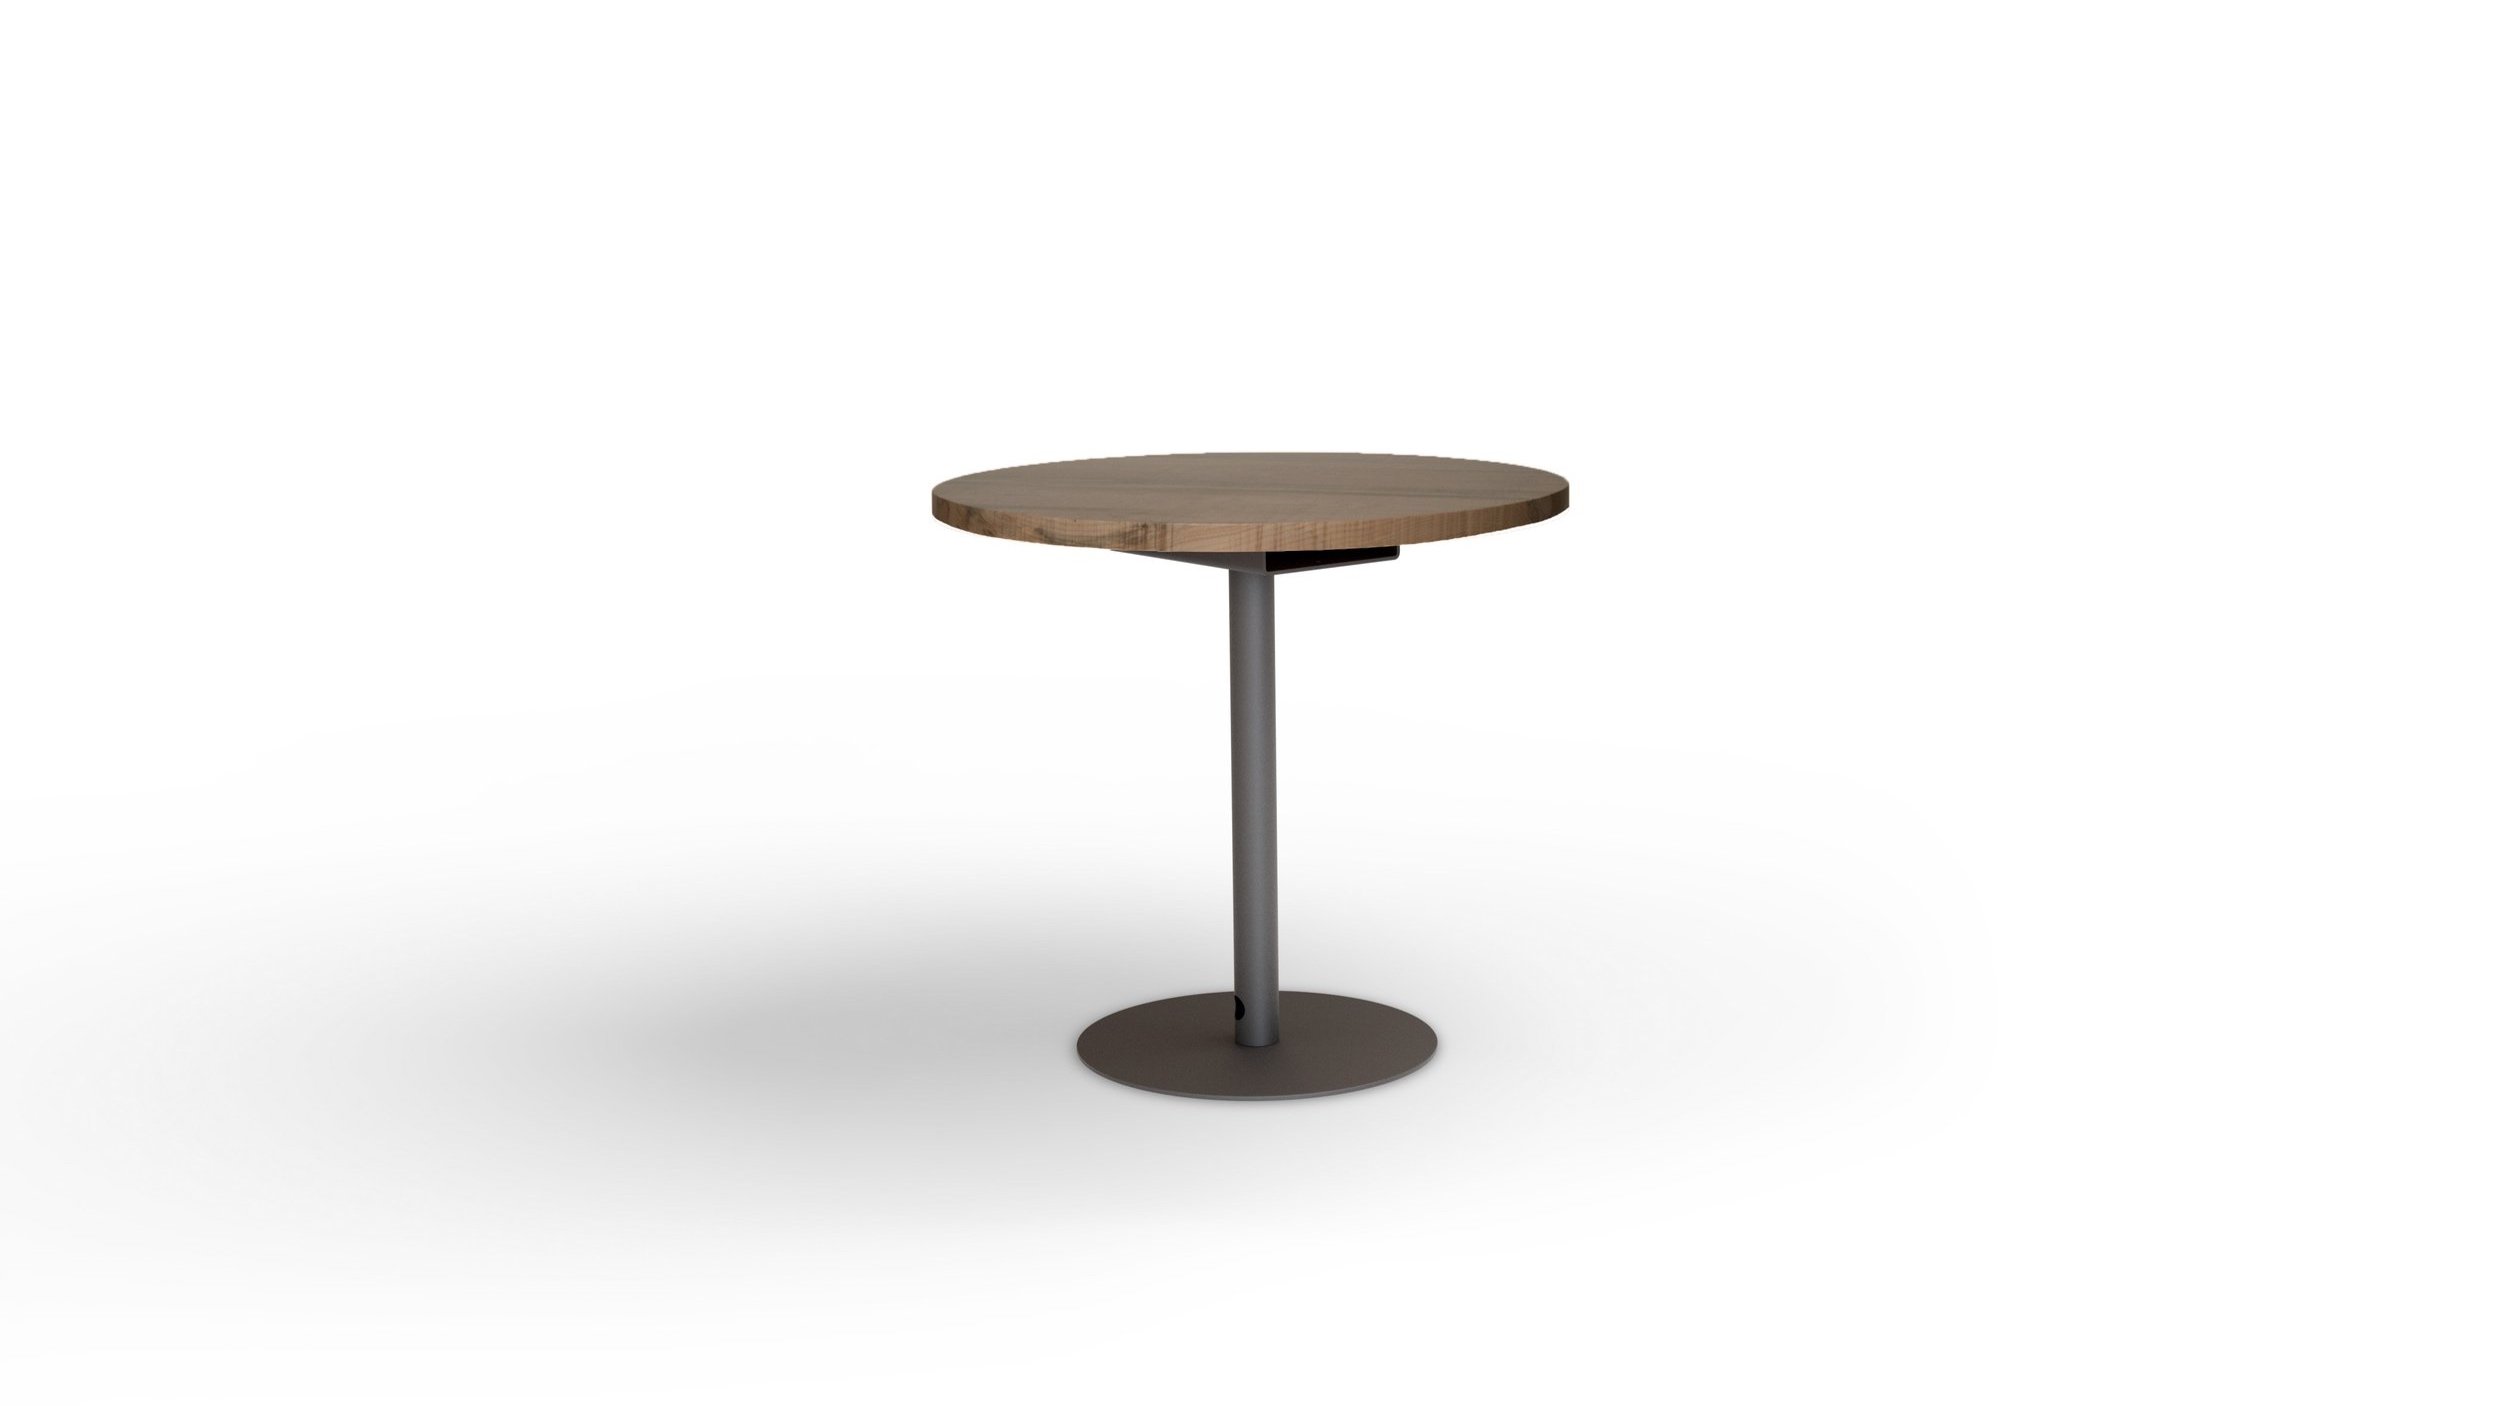 VERSION WITH 30” PLANKED ROUND WALNUT TOP IN CLEAR FINISH; BASE IN BLACK FINISH